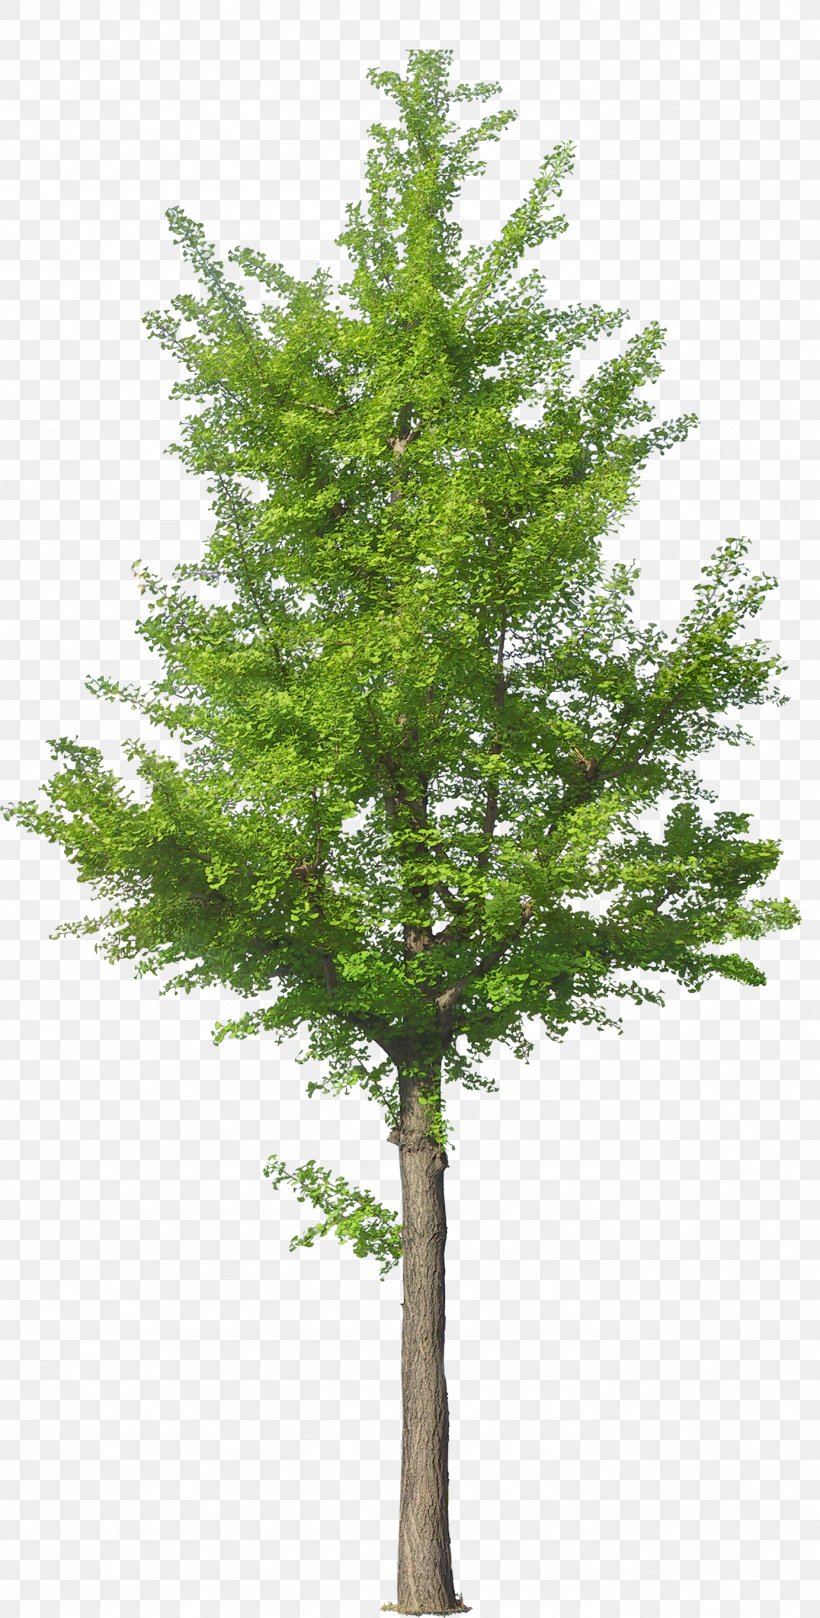 Clip Art Image Tree Adobe Photoshop, PNG, 1384x2731px, Tree, Branch, Conifer, Evergreen, Fir Download Free